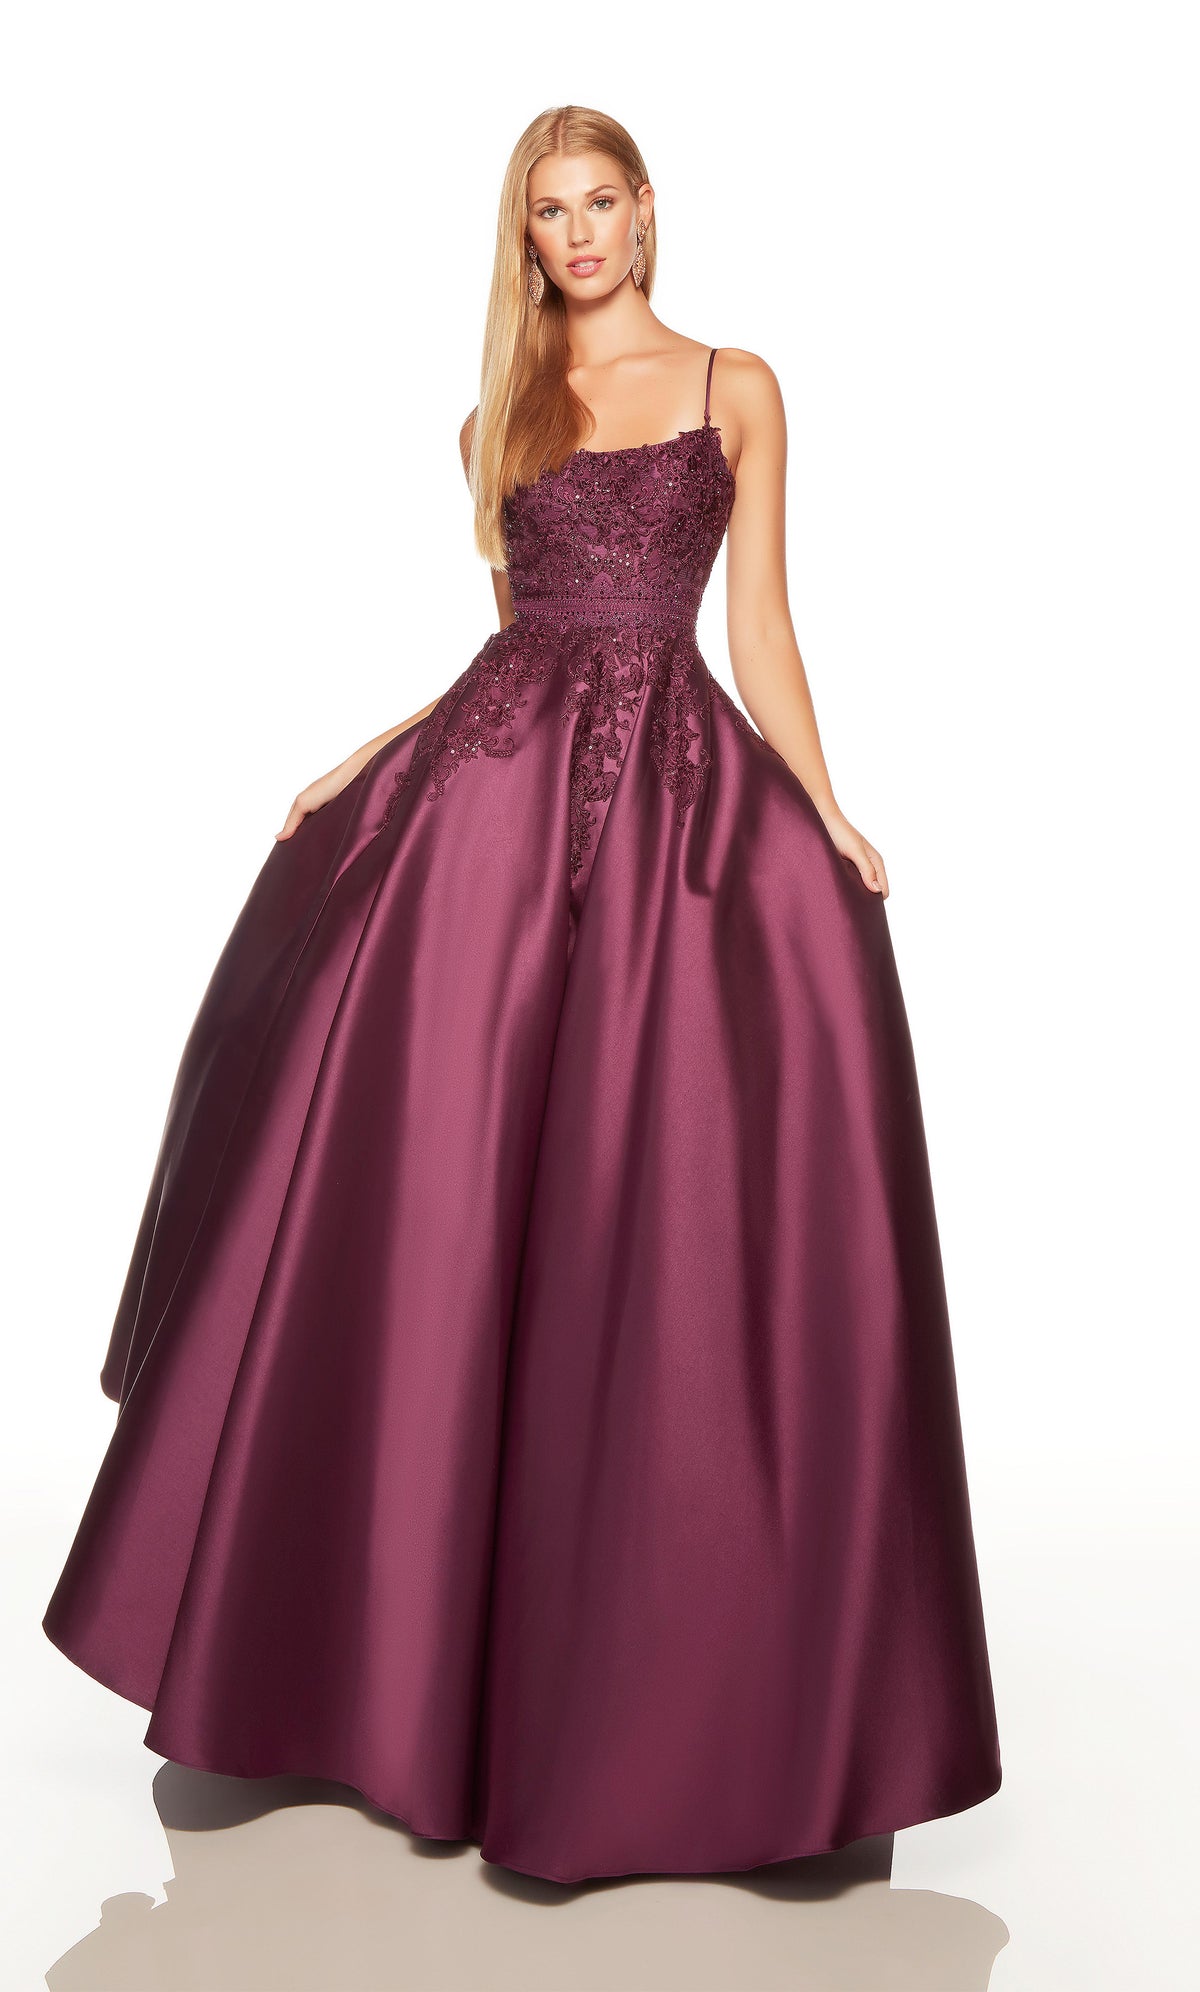 Elegant prom dress with a scoop neckline and floral lace appliques in black plum color. COLOR-SWATCH_61321__BLACK-PLUM